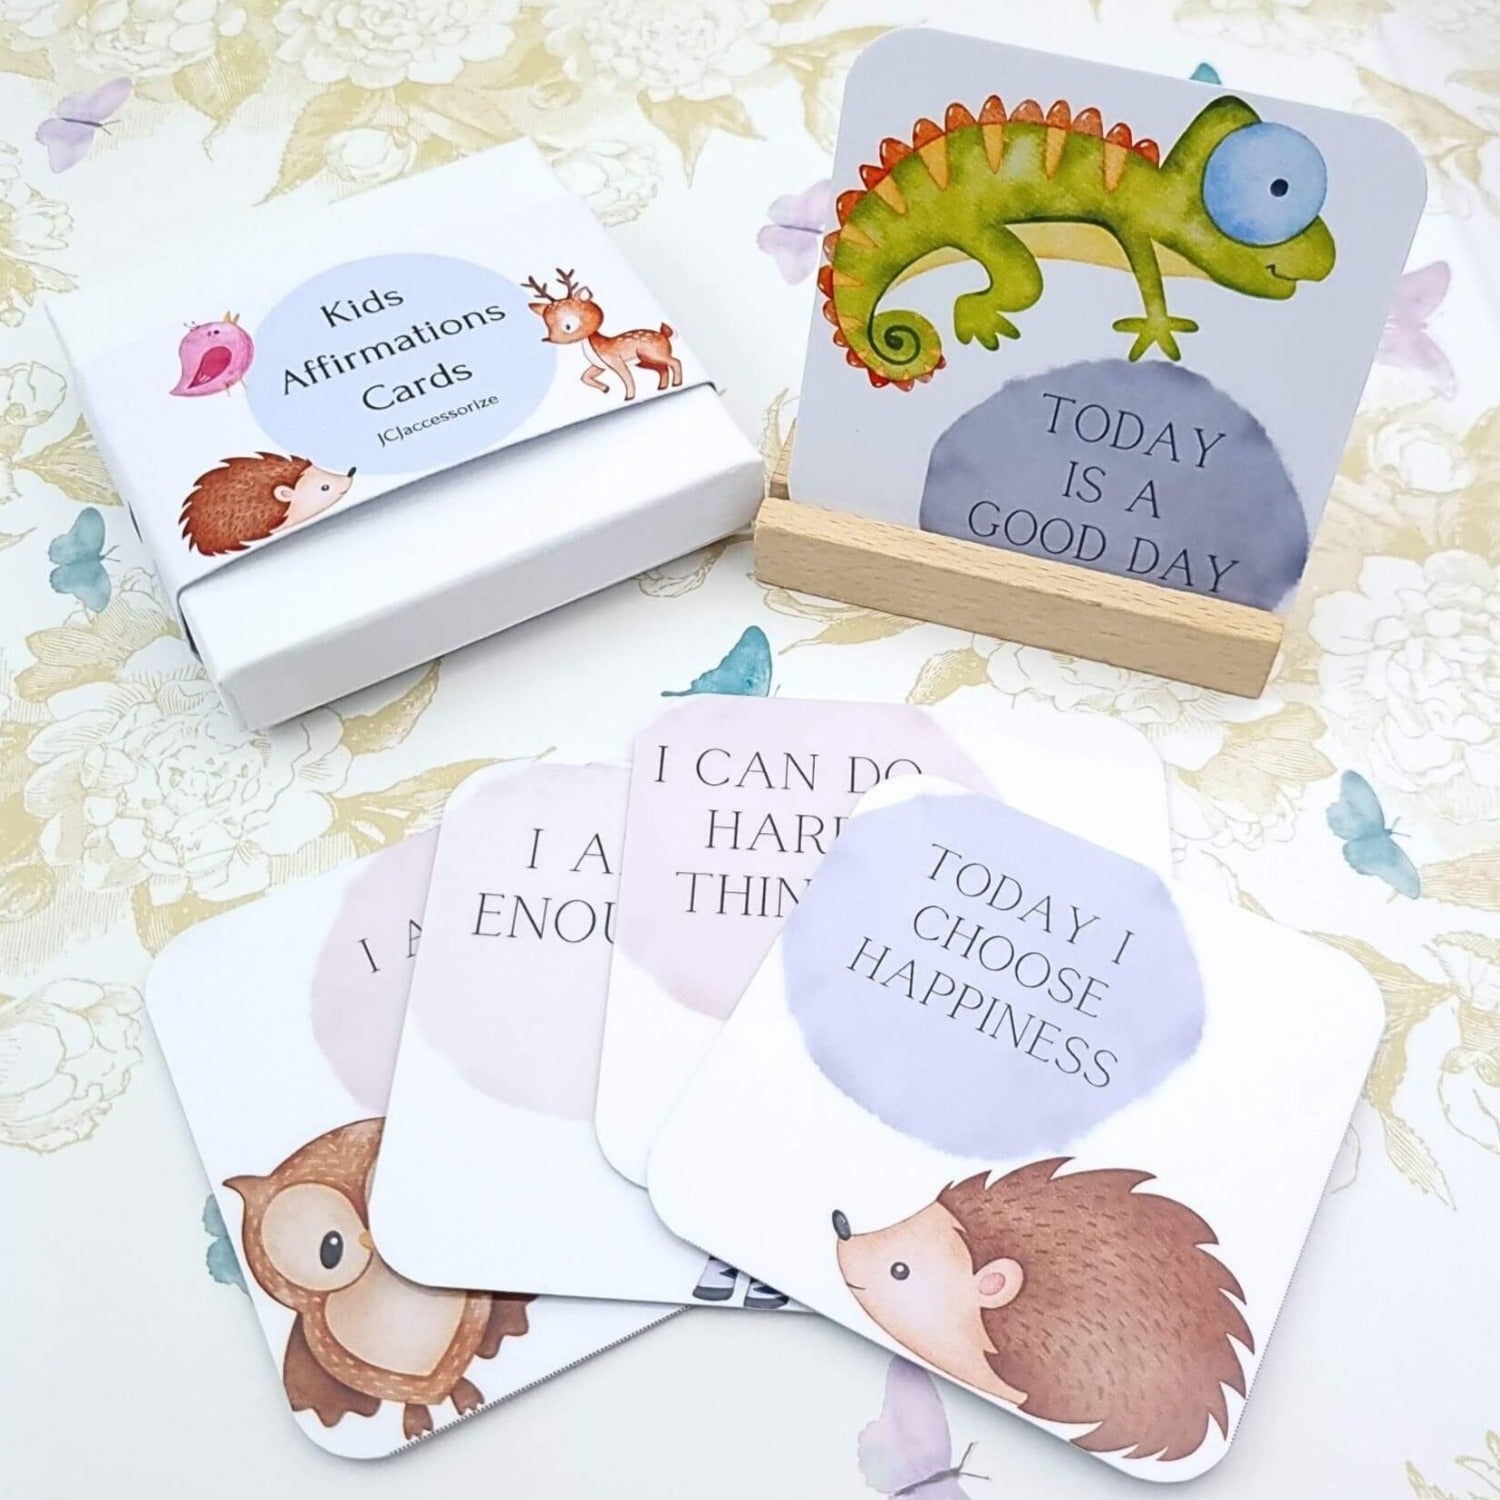 kids affirmation cards with animals